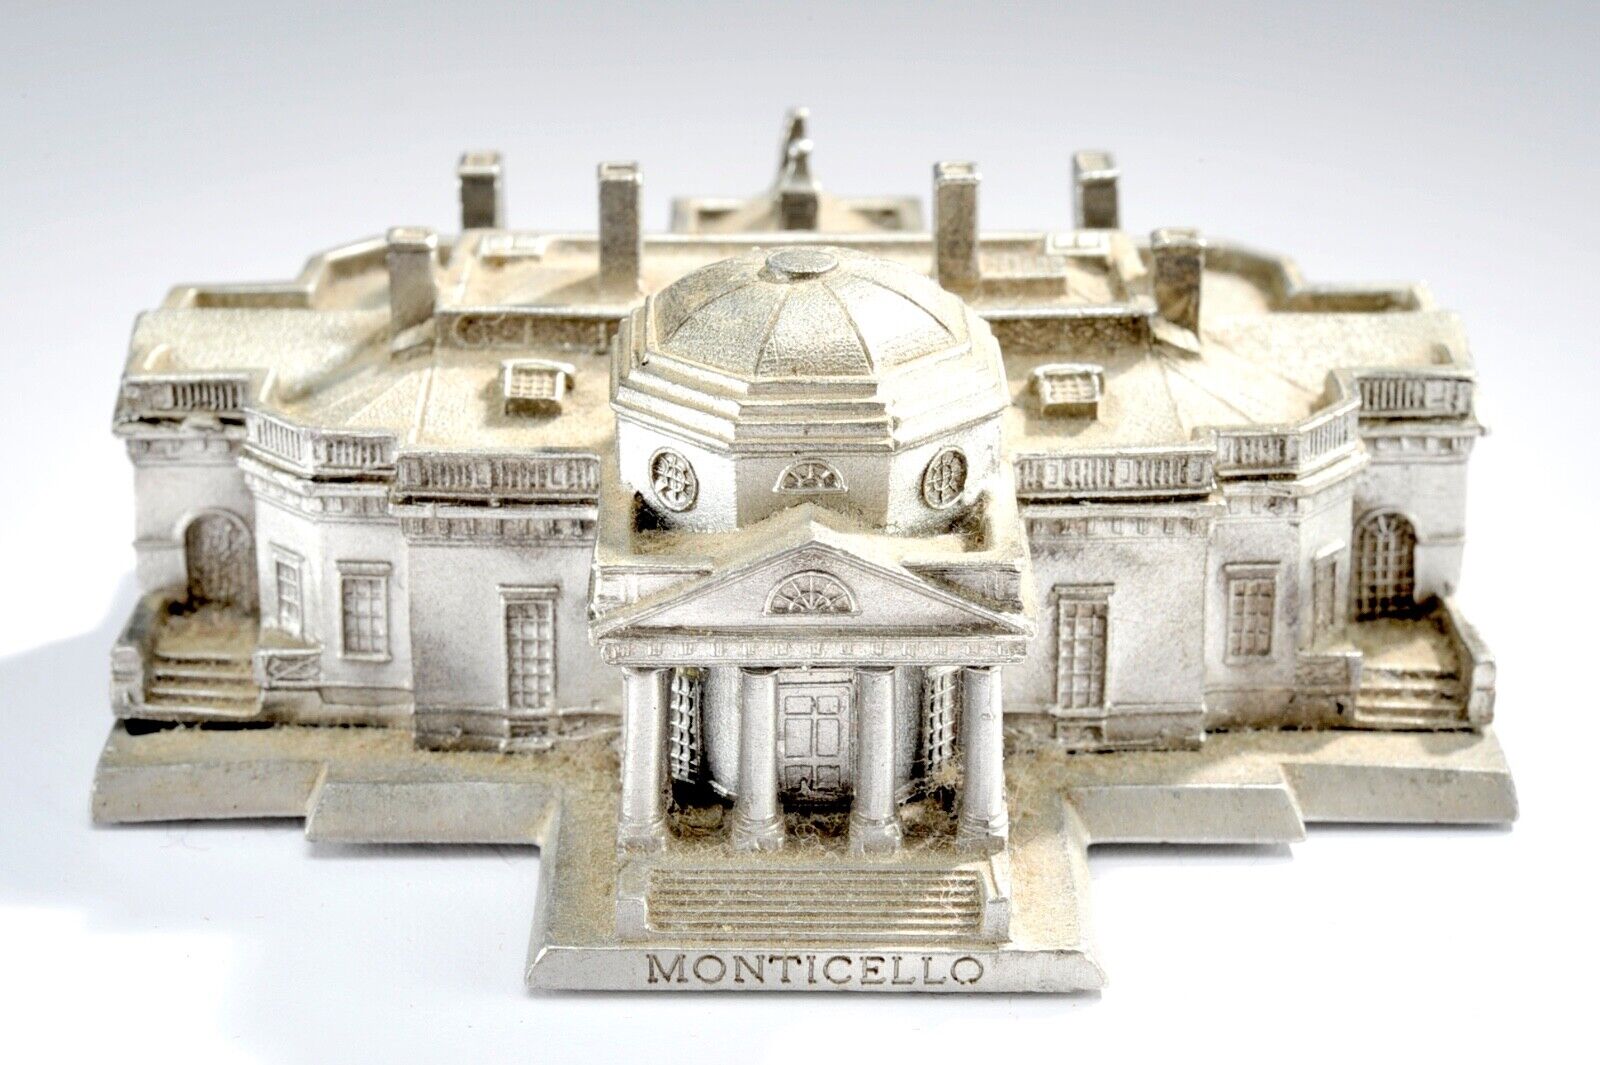 Vintage Architectural Monticello Paperweight - Home of Thomas Jefferson